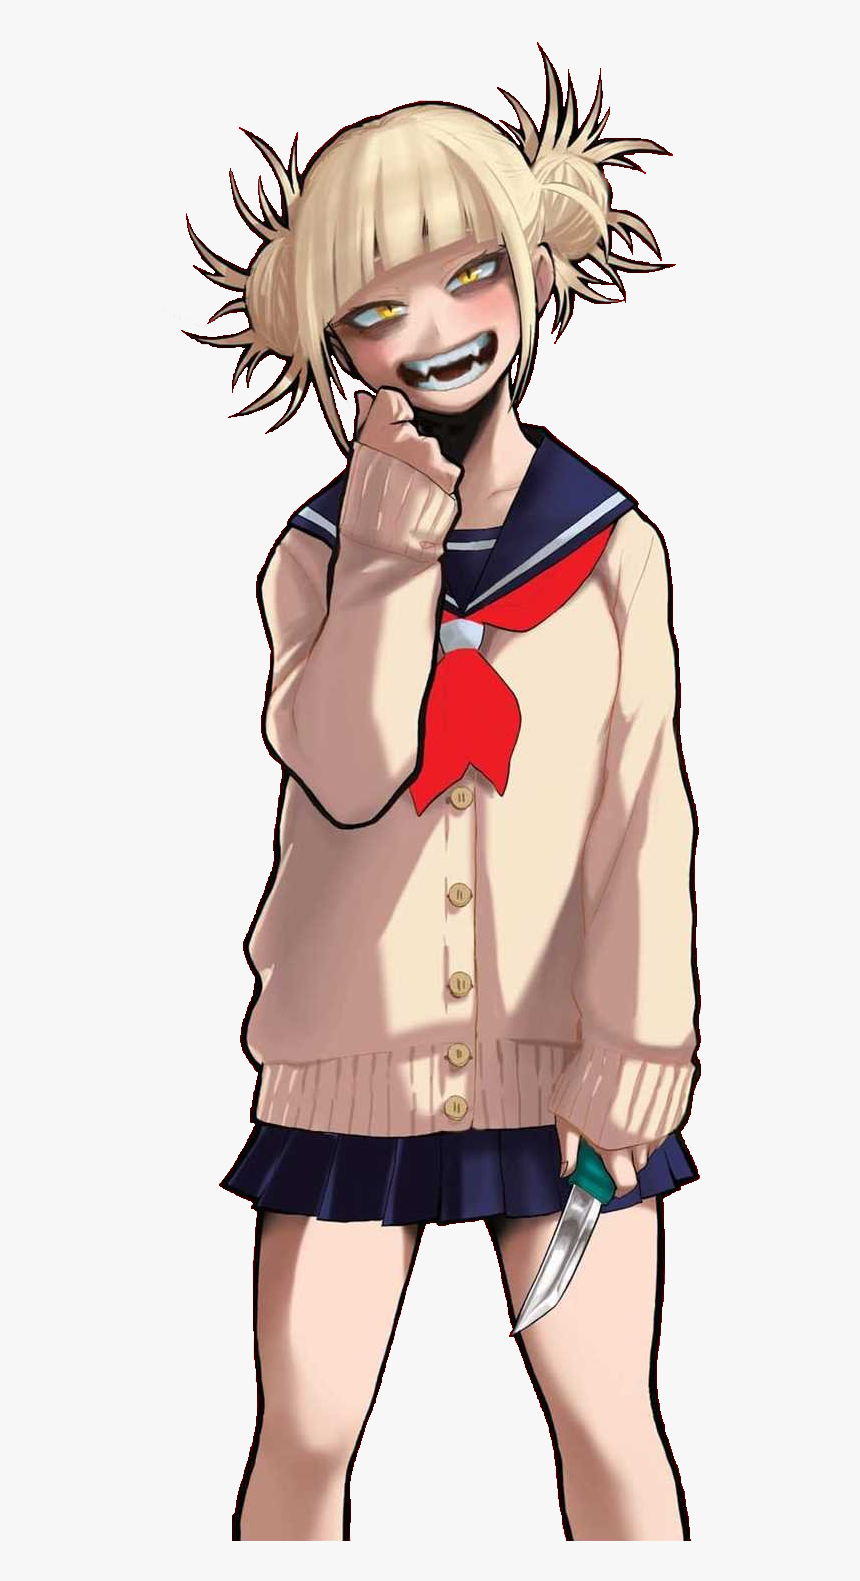 Himiko Toga Colour - Psycho Girl My Hero Academia, HD Png Download is free transparent...